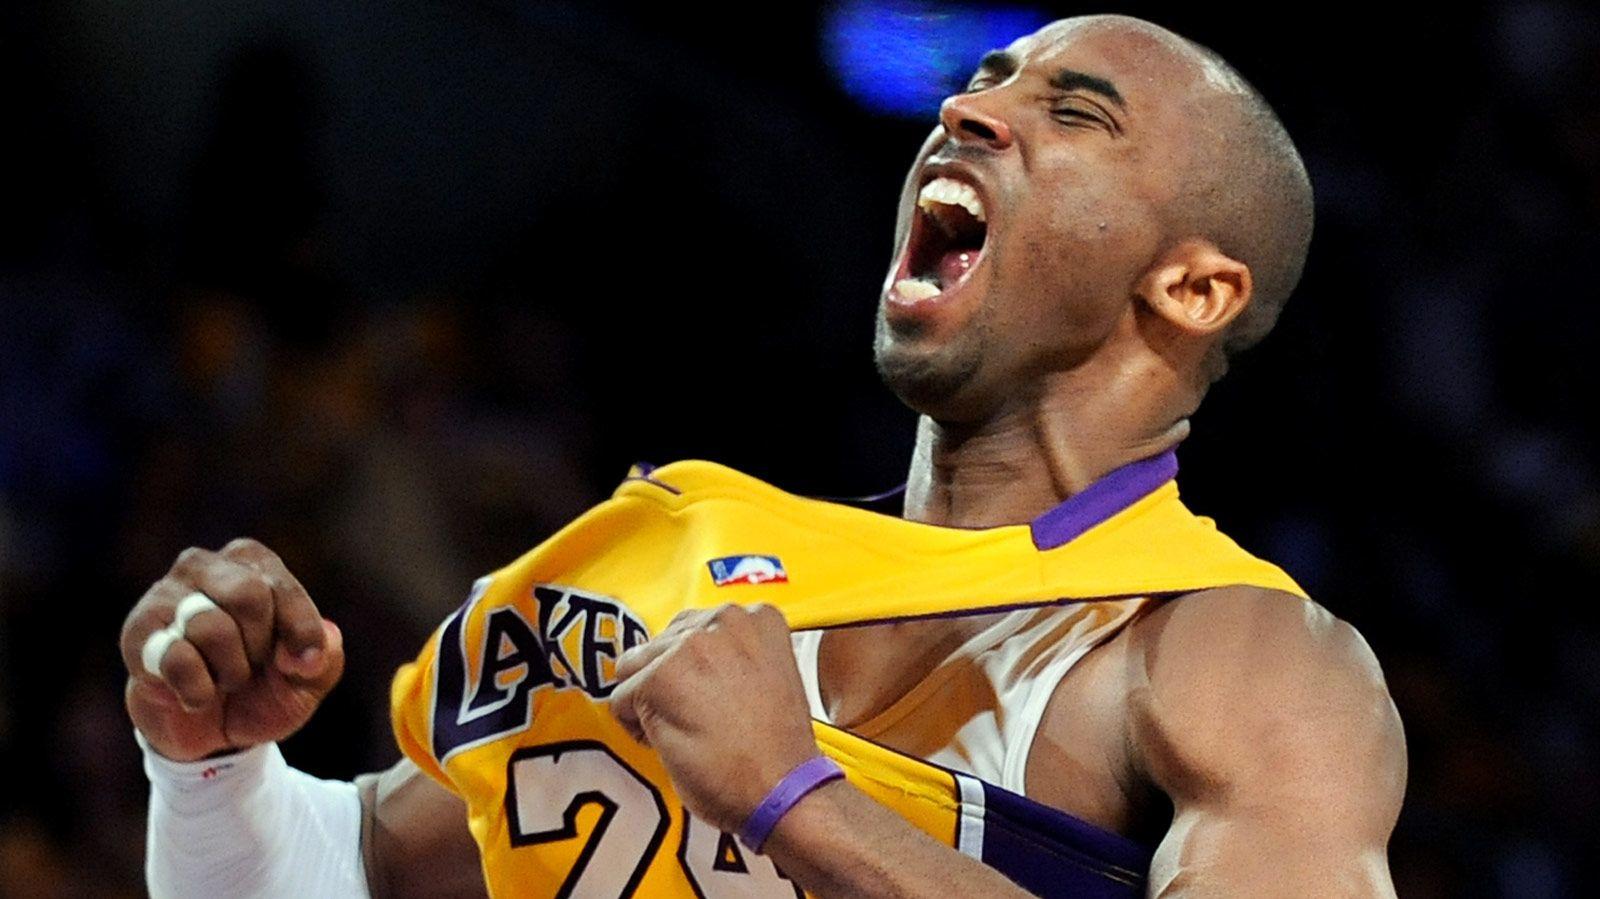 Kobe Bryant S Iconic Lakers Jersey Expected To Sell For Up